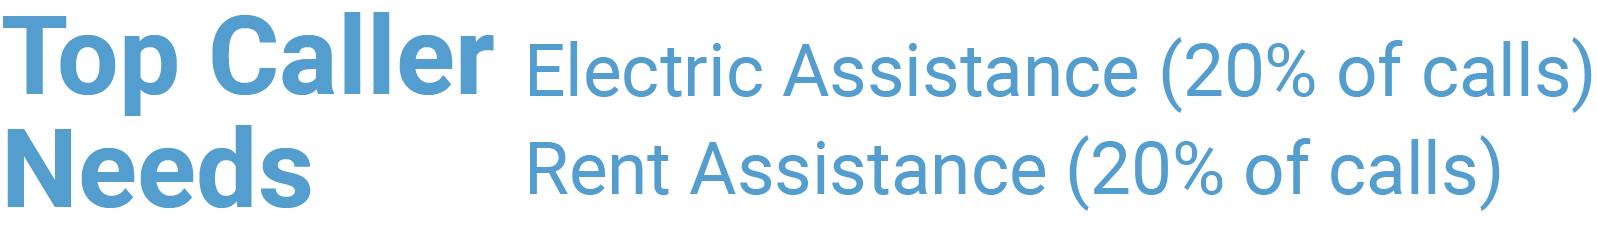 Top Caller Needs: Electric Assistance (20% of calls) and Rent Assistance (20% of calls)